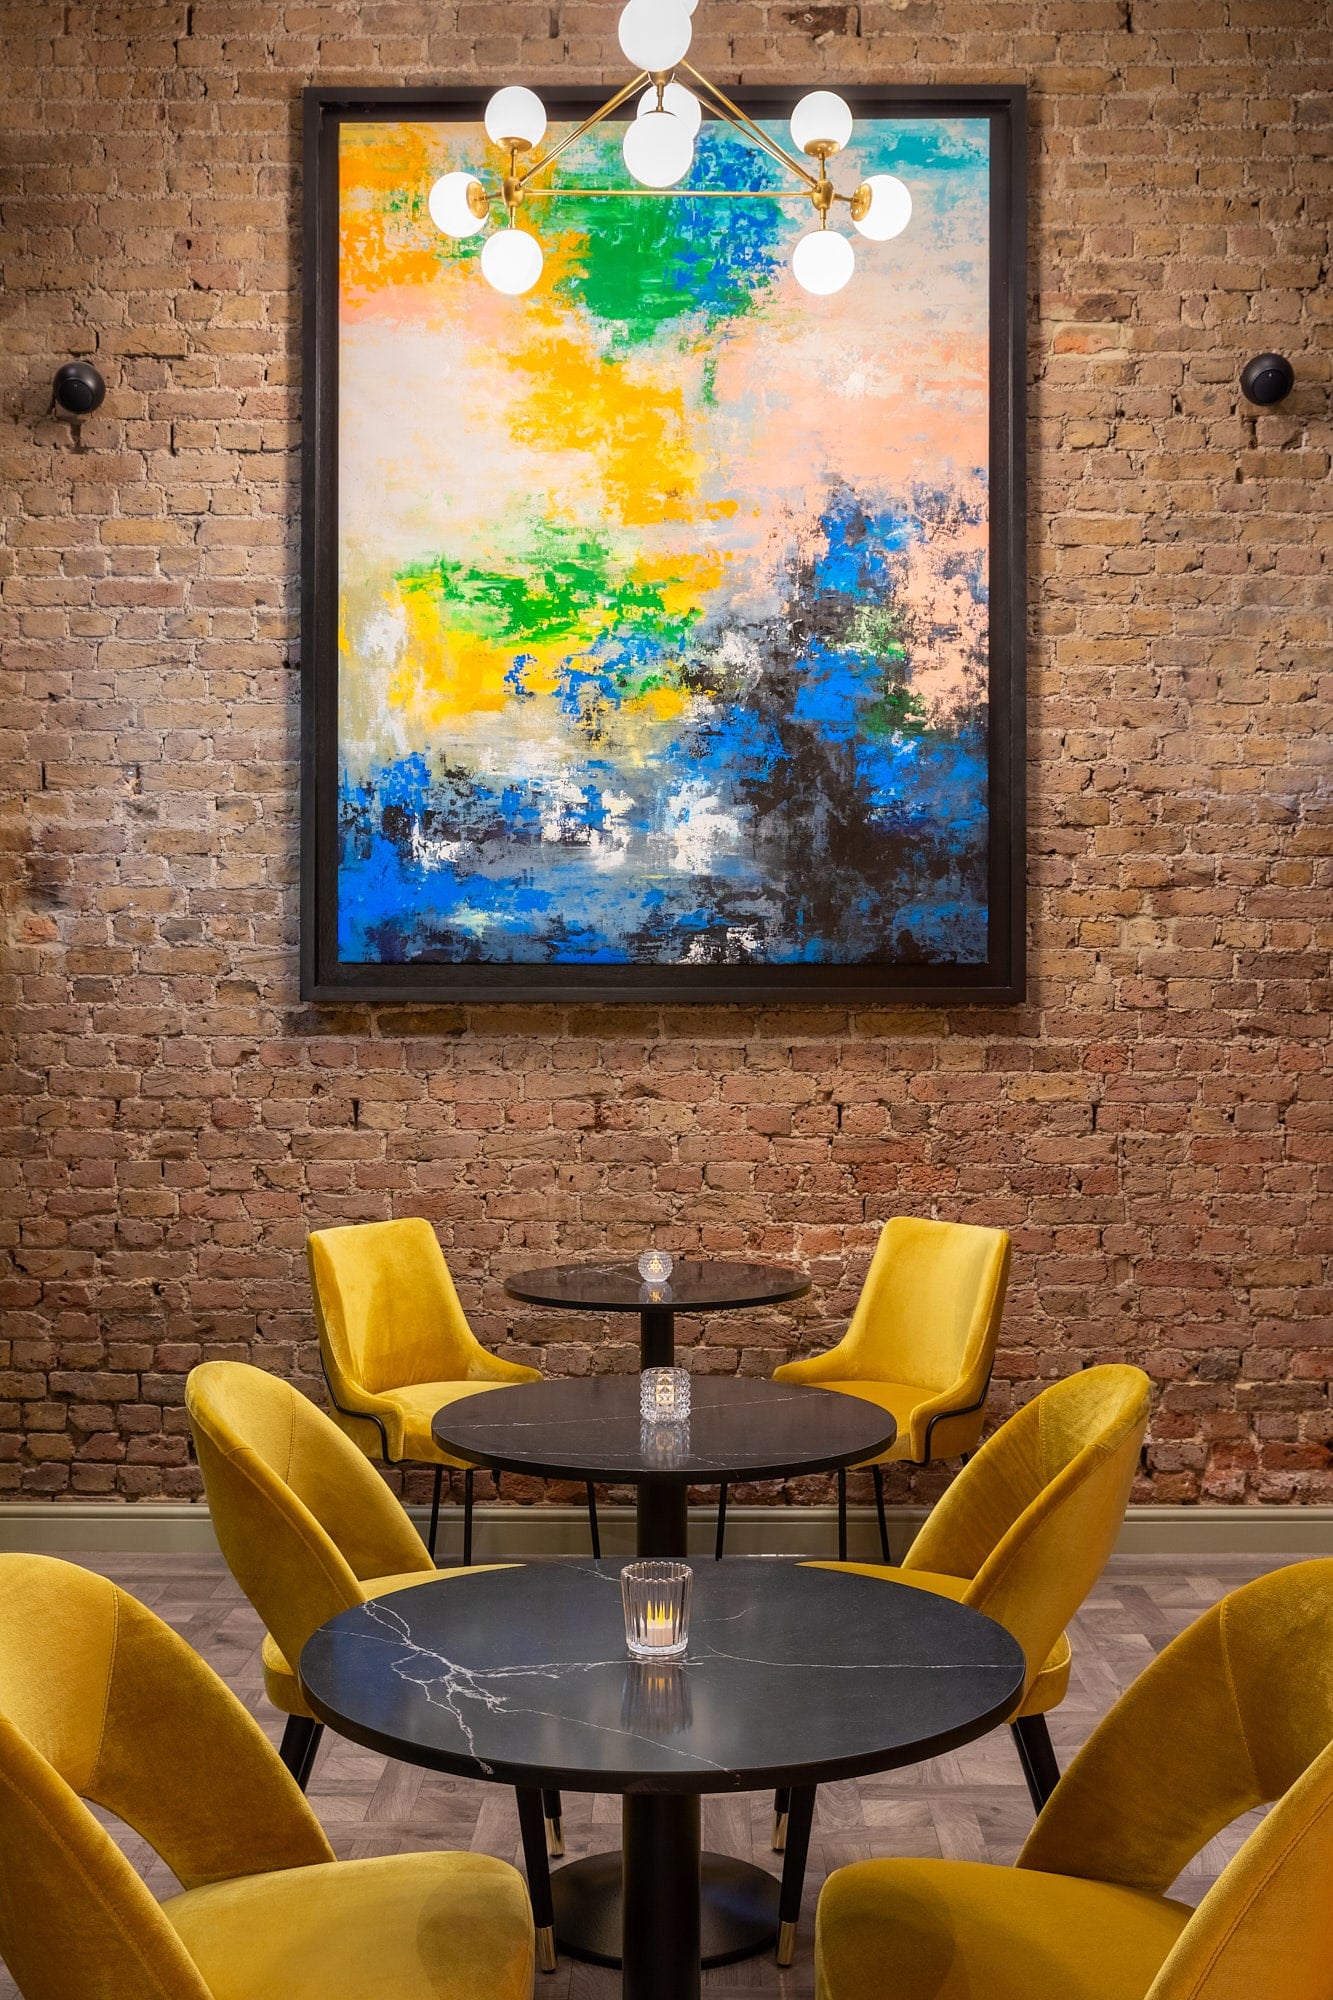 Round tables and yellow velvet chairs with an art on the wall and light